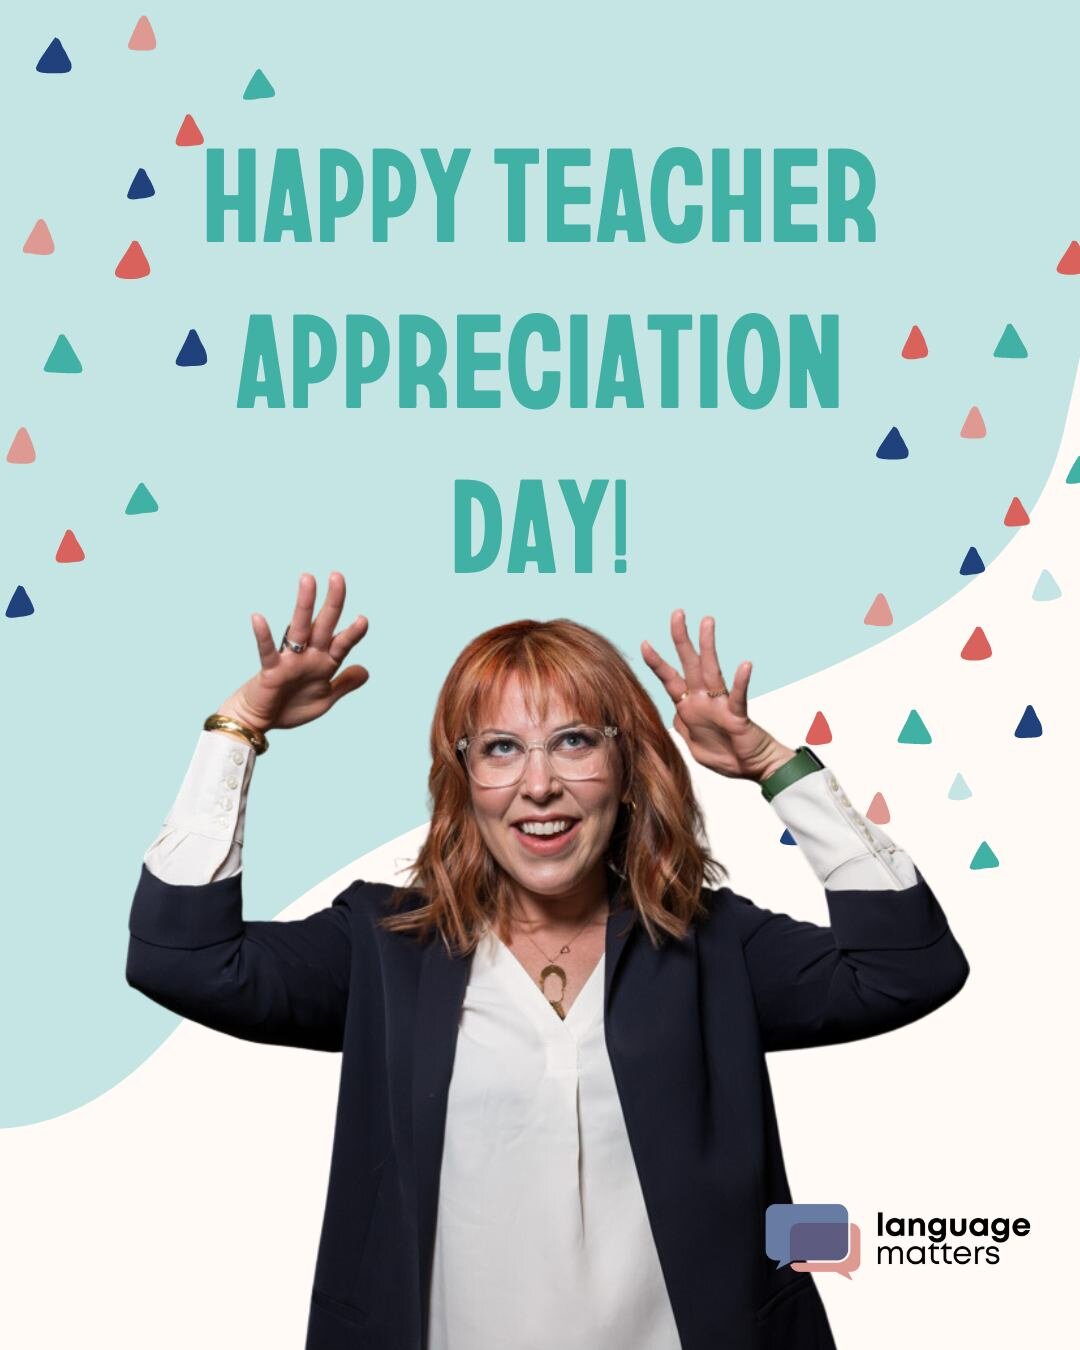 Happy Teacher Appreciation Day, colegas. 🎉📚💻

Today is a day to celebrate YOU and all the amazing work that you do to help students succeed. We see you, we appreciate you, and we are here to support you.

Thank you for all that you do!  Keep being